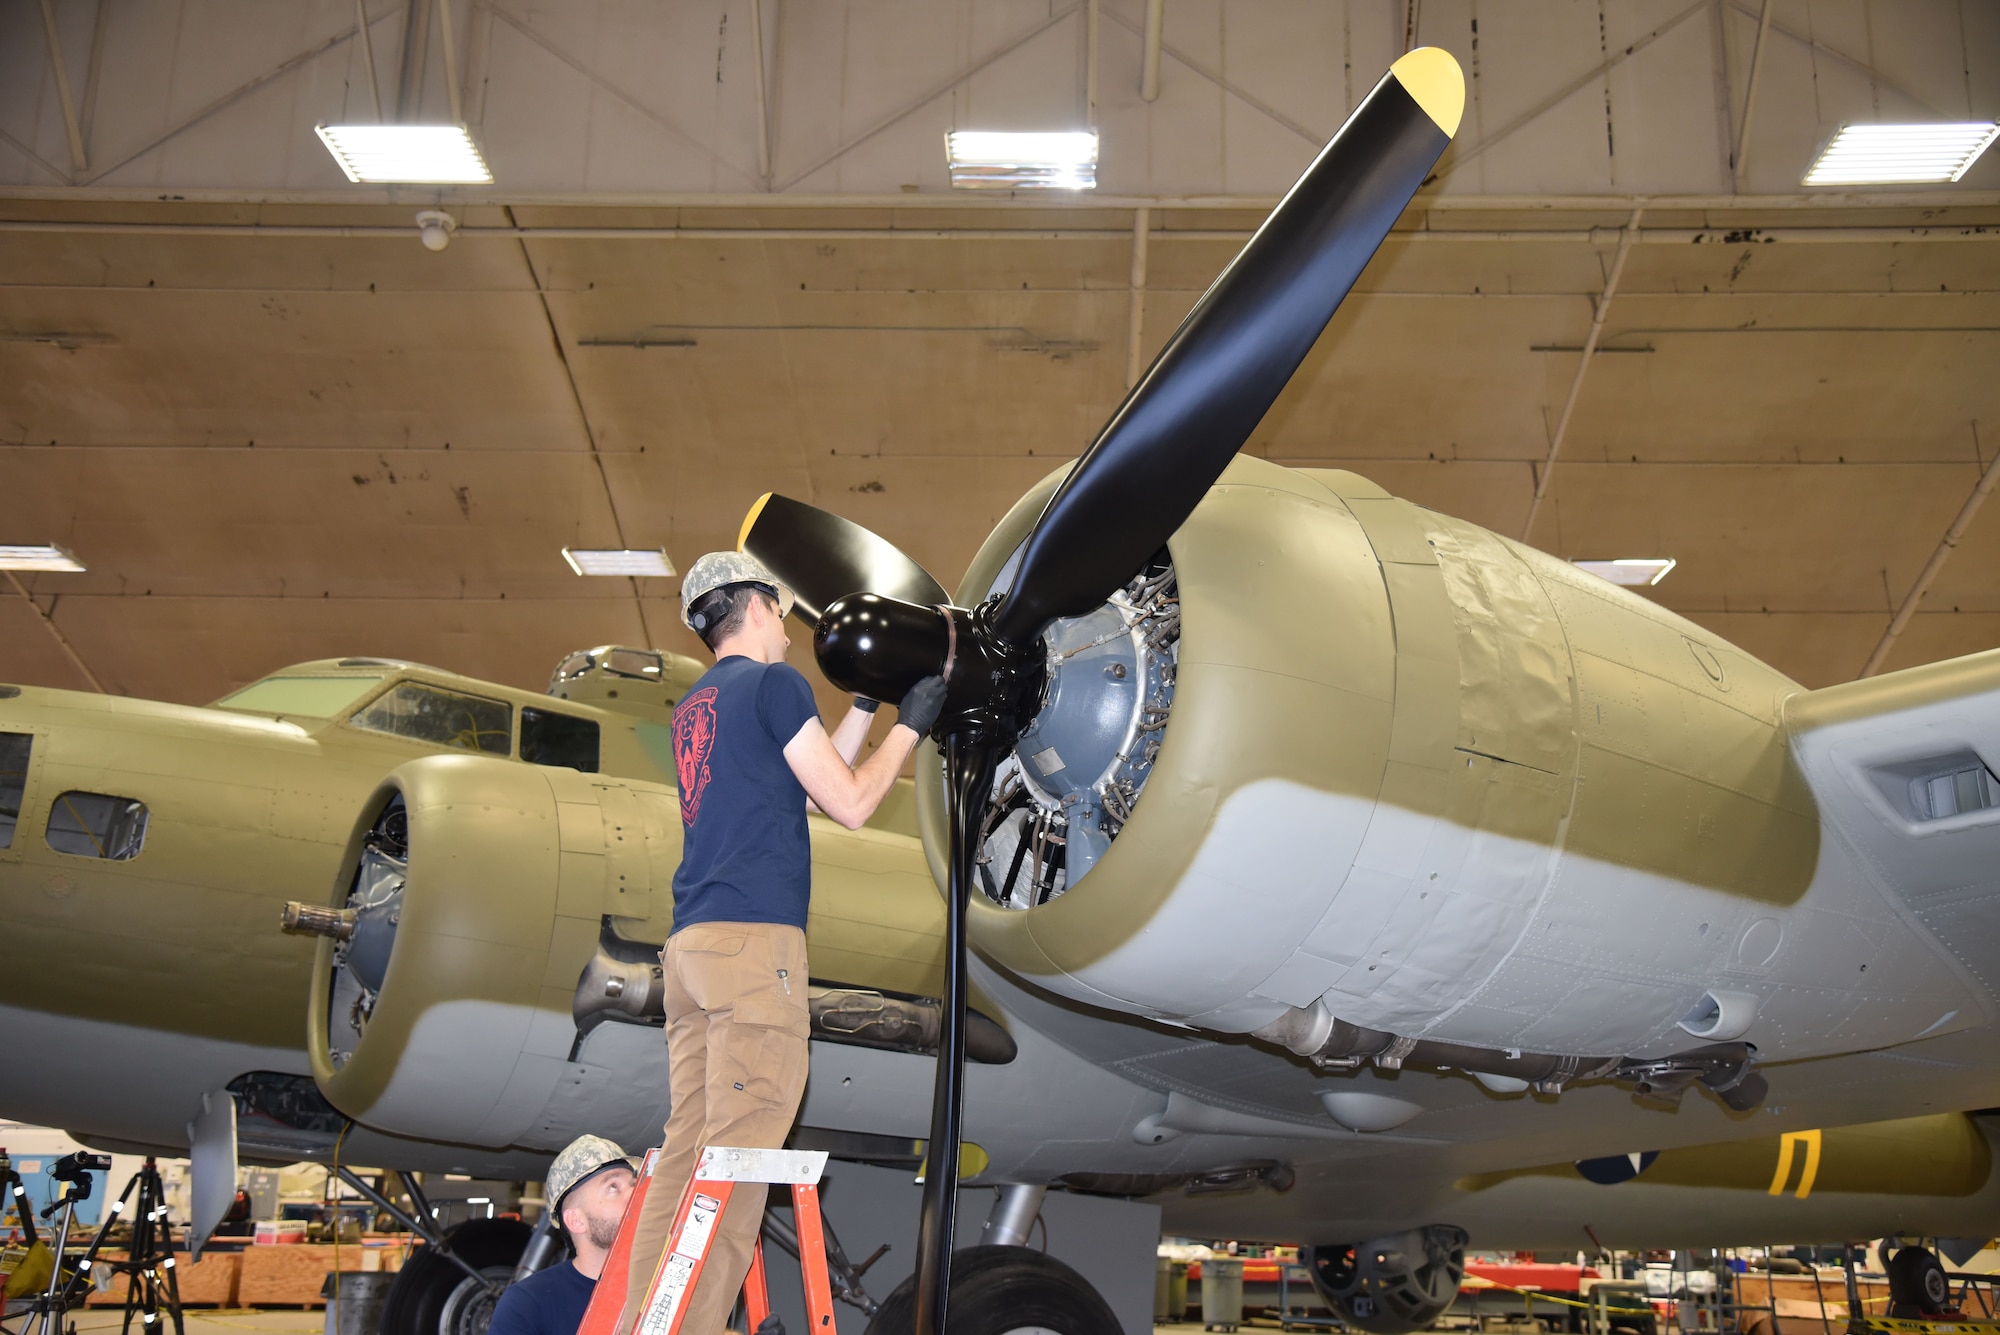 (01/23/2018) -- National Museum of the U.S. Air Force restoration crews installing propeller number one on the Boeing B-17F Memphis Belle™. Plans call for the aircraft to be placed on permanent public display in the WWII Gallery here at the National Museum of the U.S. Air Force on May 17, 2018. (U.S. Air Force photo by Ken LaRock)